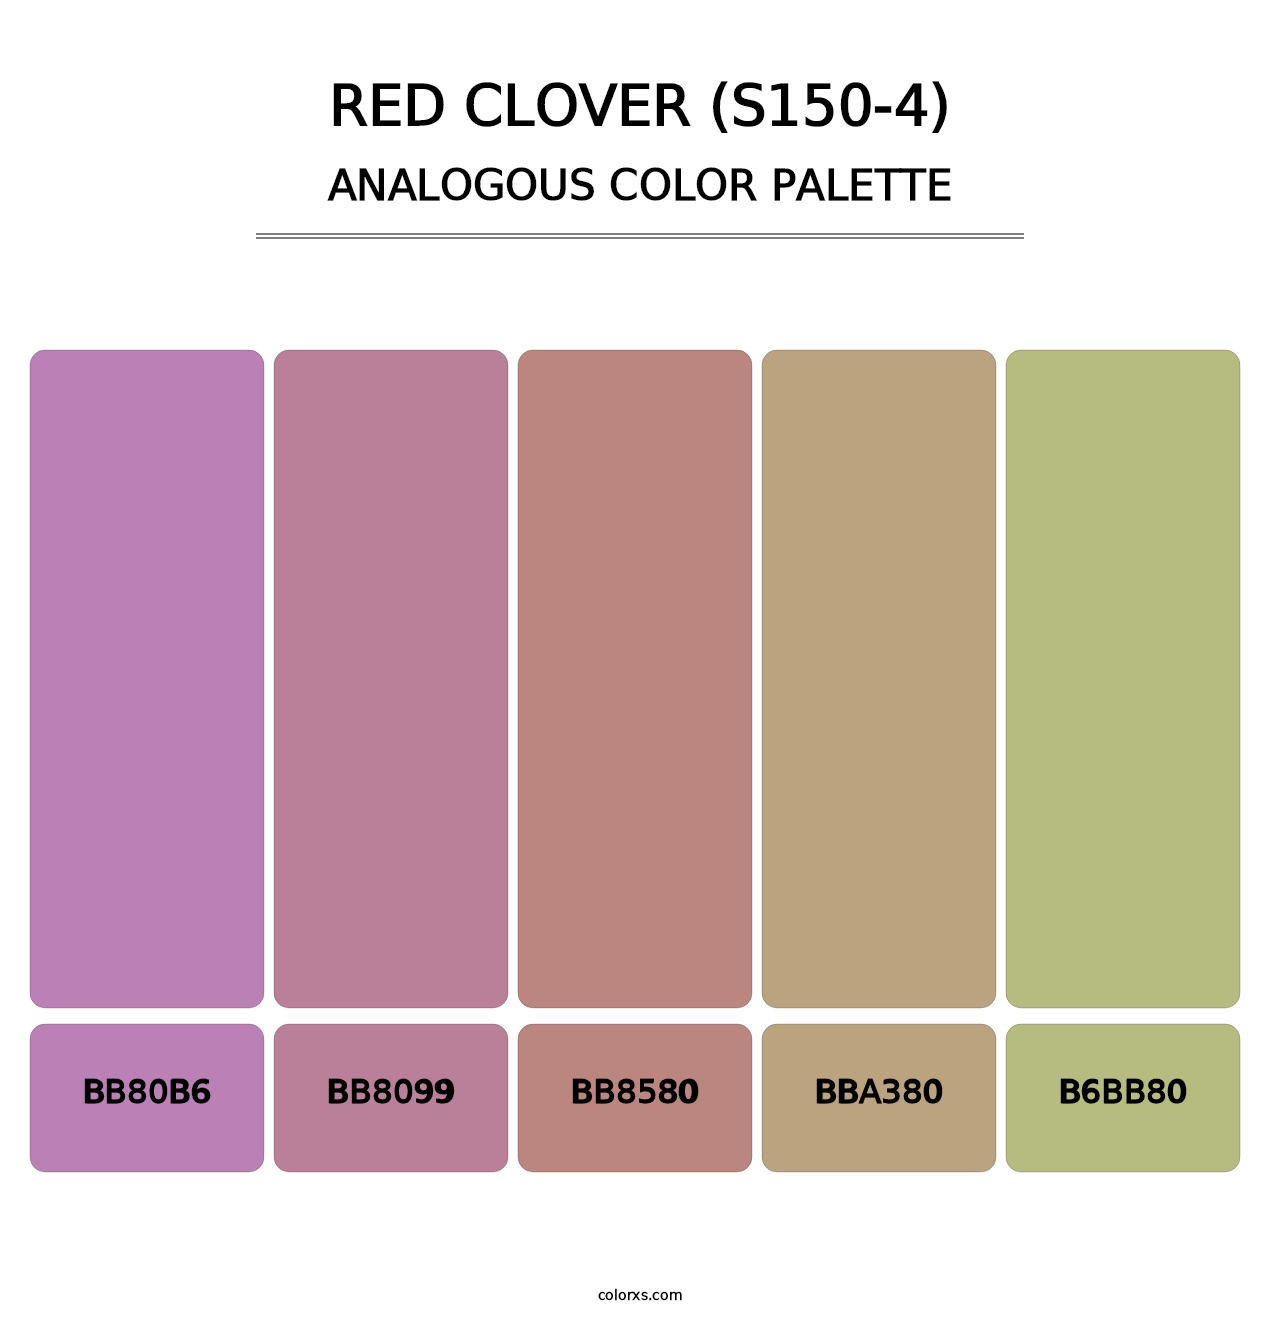 Red Clover (S150-4) - Analogous Color Palette